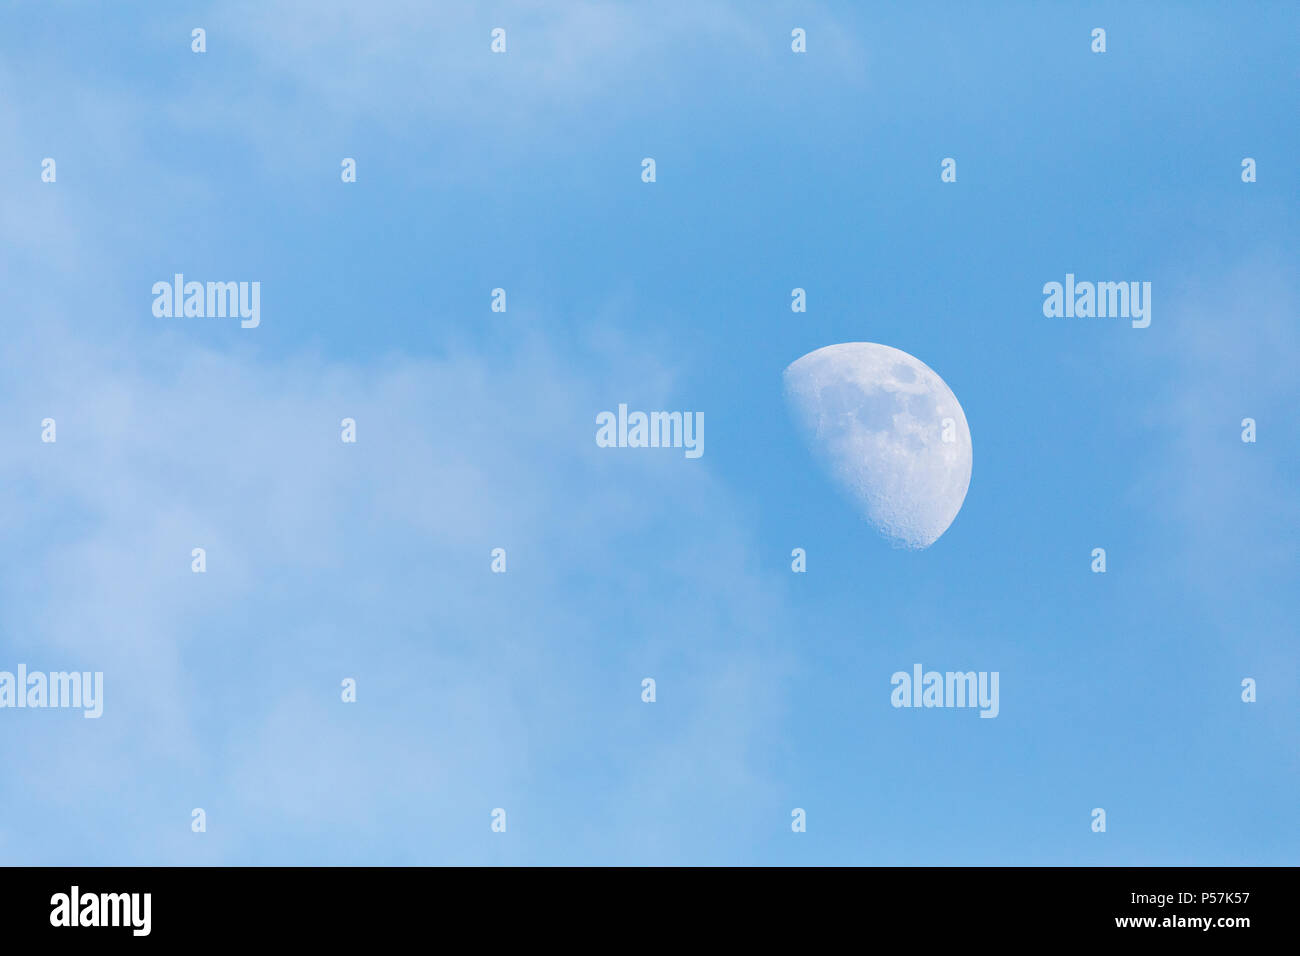 Half Moon showing during the day against blue sky with clouds surrounding it Stock Photo